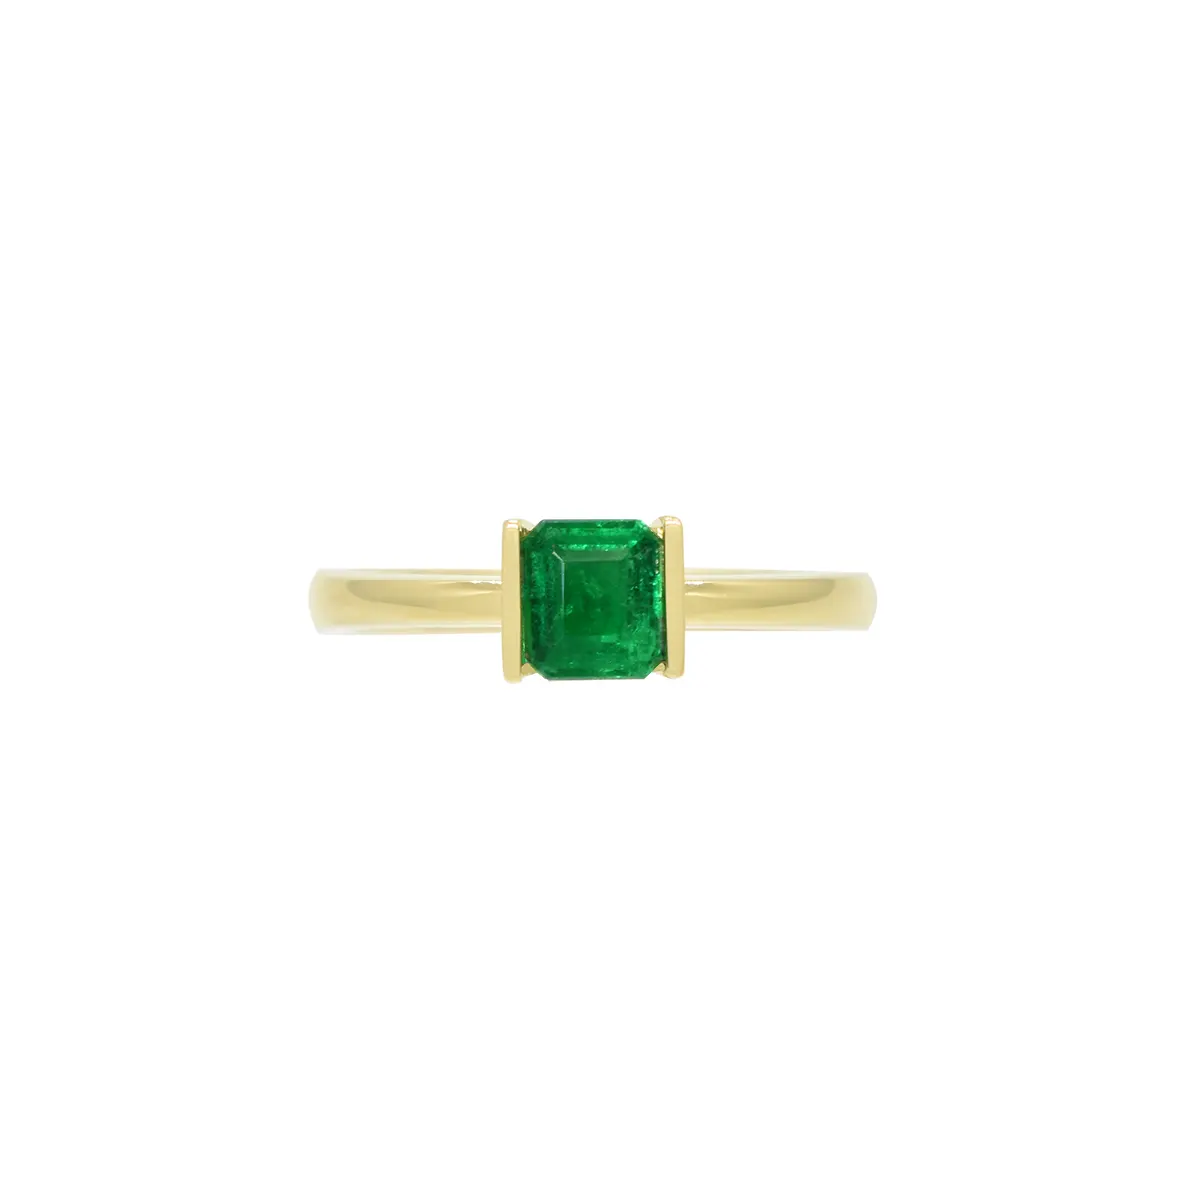 Emerald Cut Emerald Solitaire Ring in 18K Yellow Gold Tension Setting 